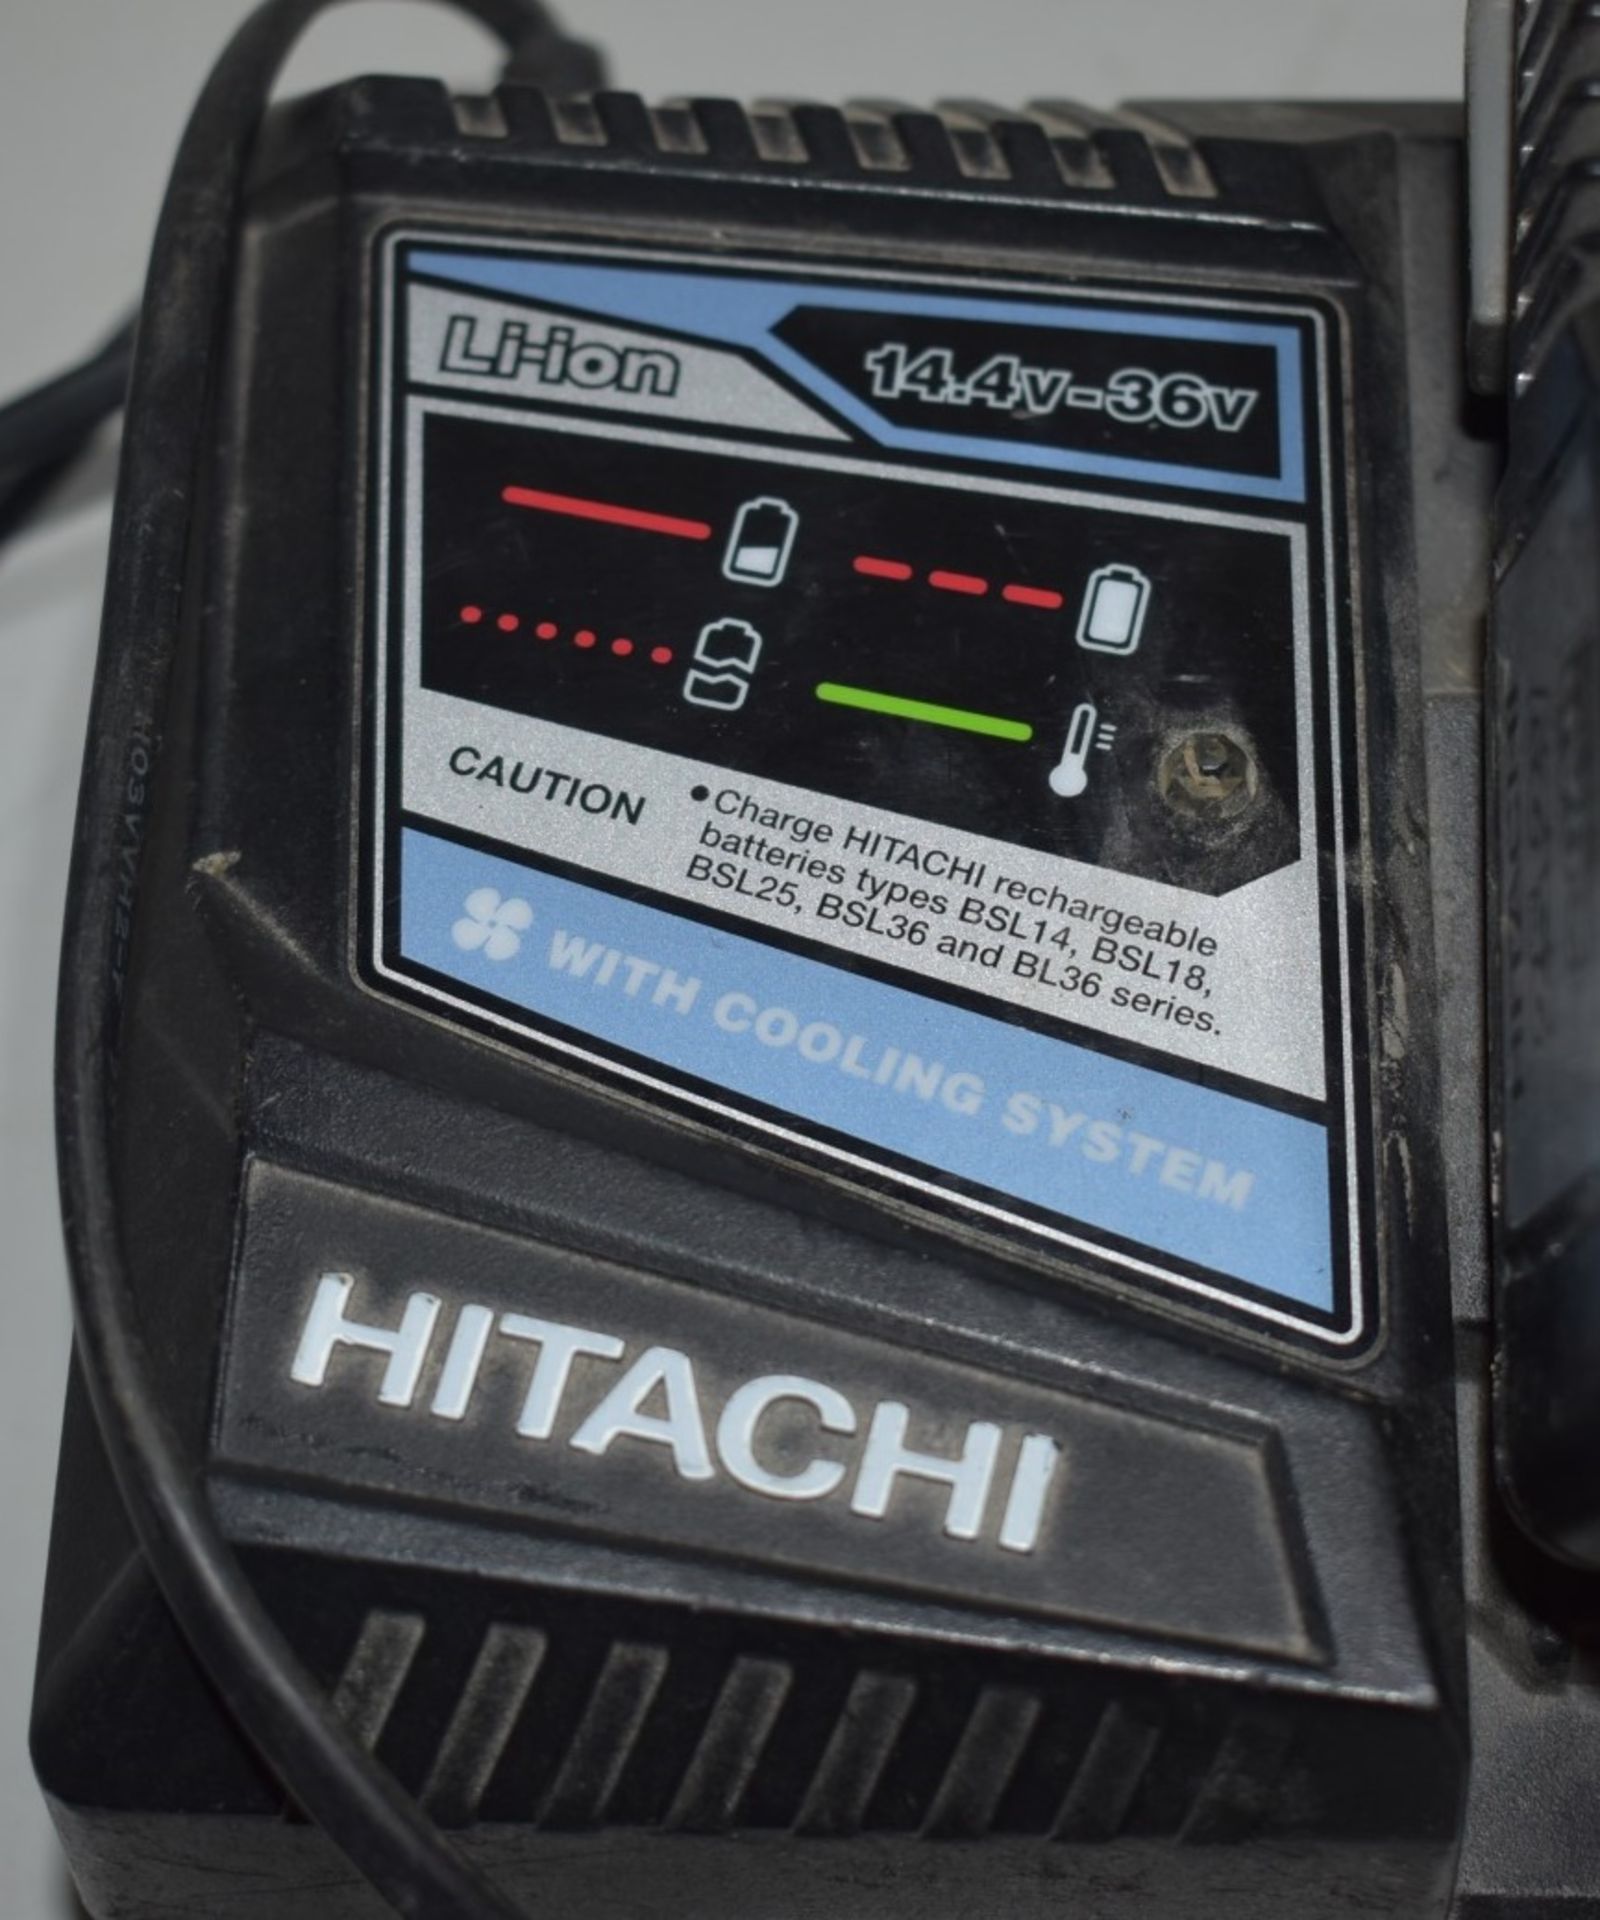 1 x HITACHI UC 36YRSL Slide Battery Charger With Cooling System - Includes Li-on Battery - Ref: - Image 2 of 2